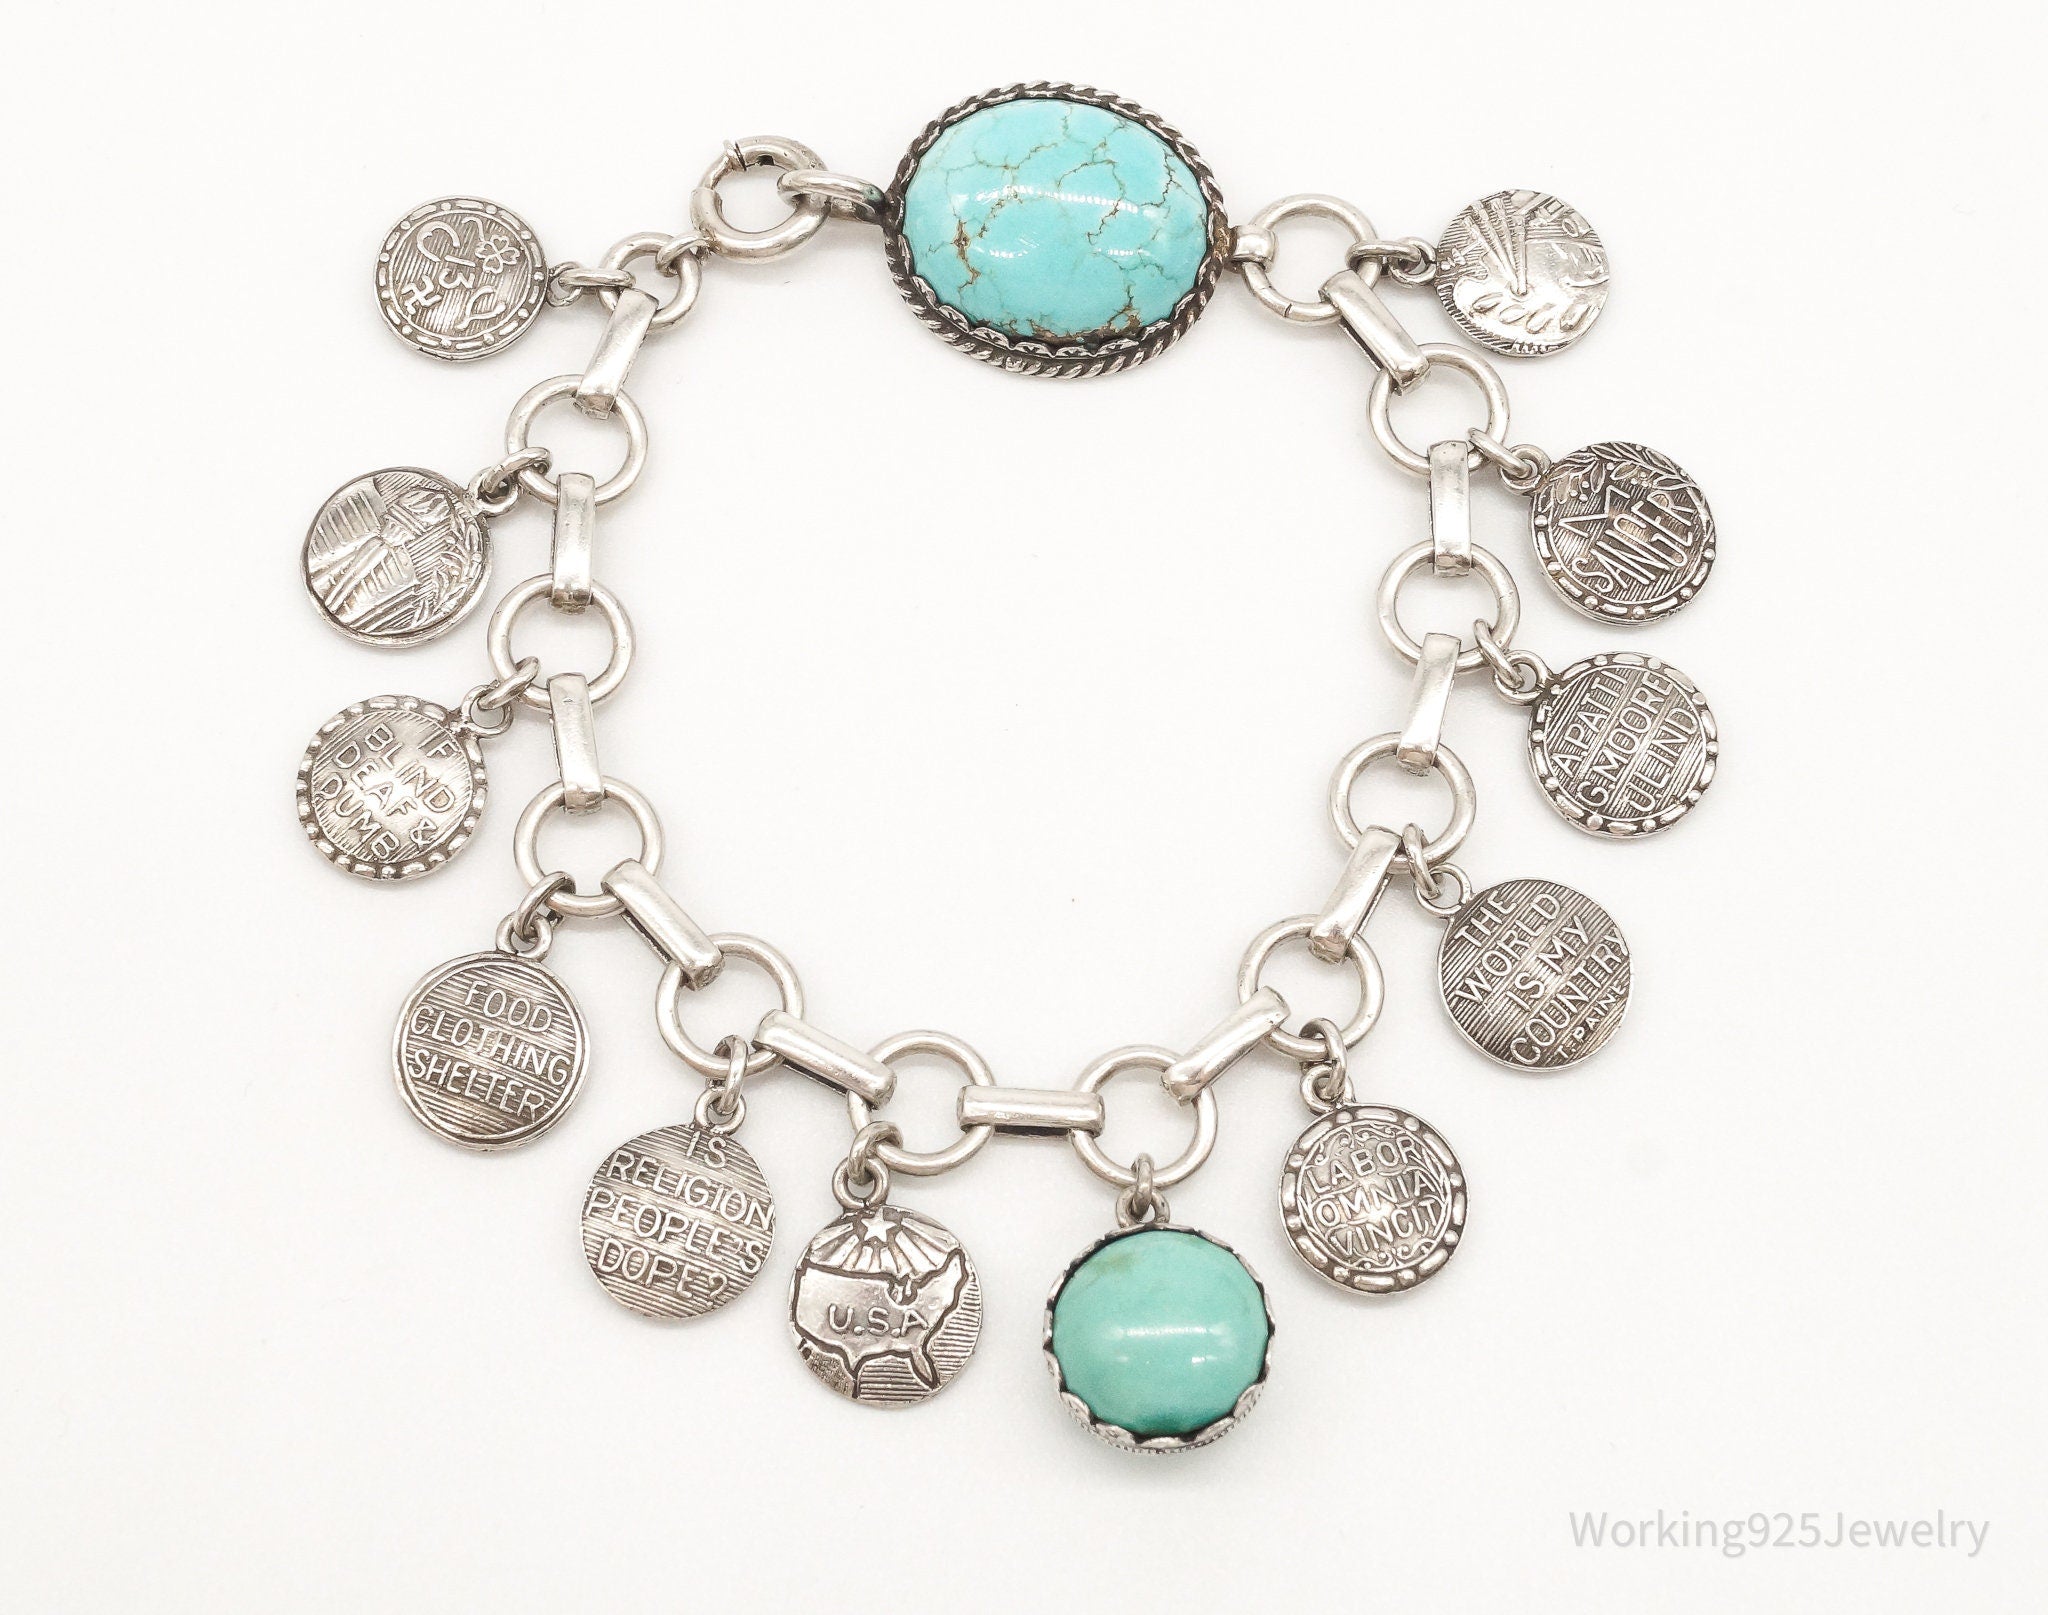 Vintage Turquoise Latin Quotes Solid Silver Charms Bracelet